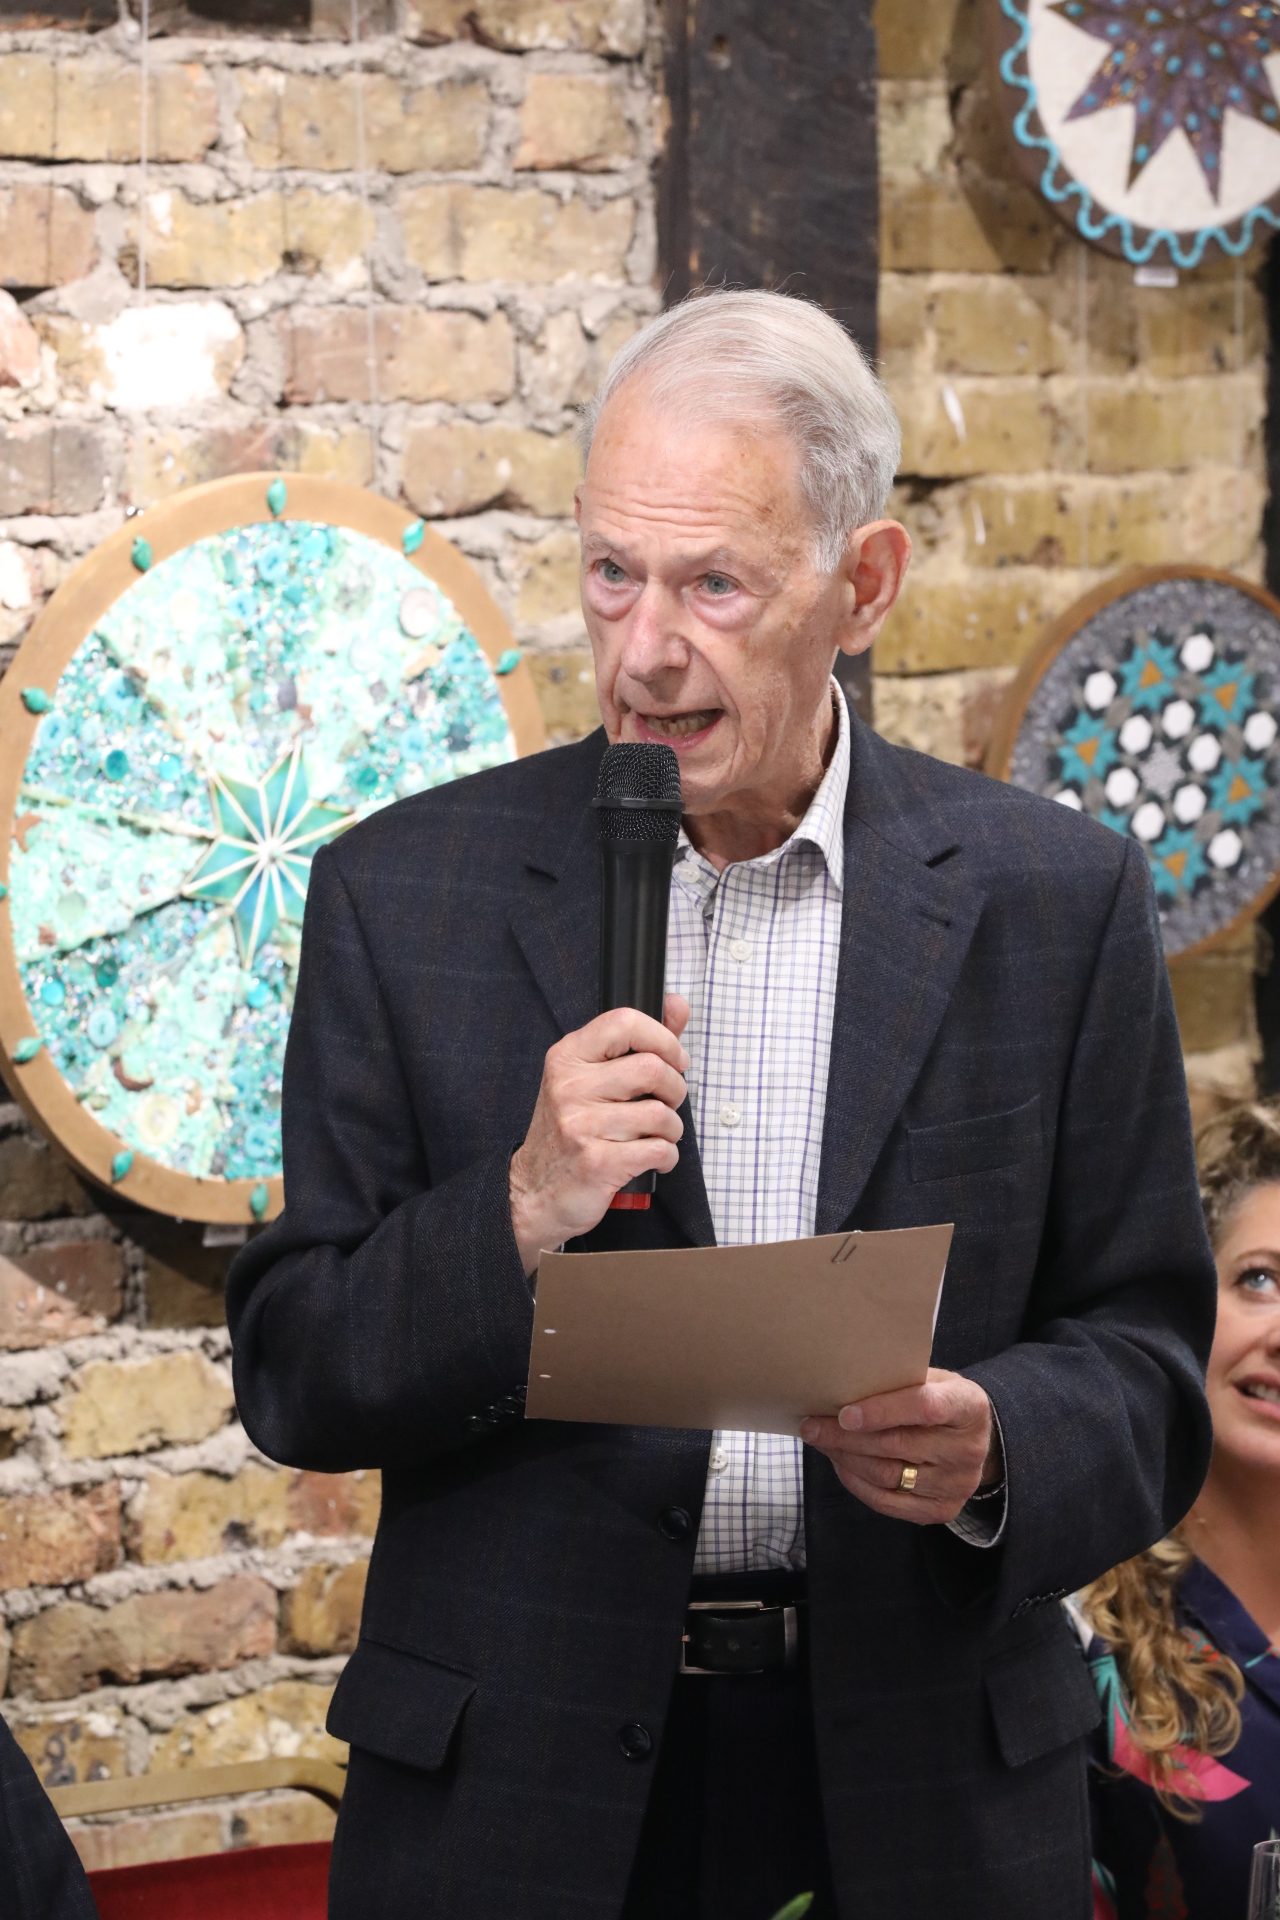 John Hajdu MBE, survivor of the Holocaust, spoke about his experience of arriving in the UK as a refugee